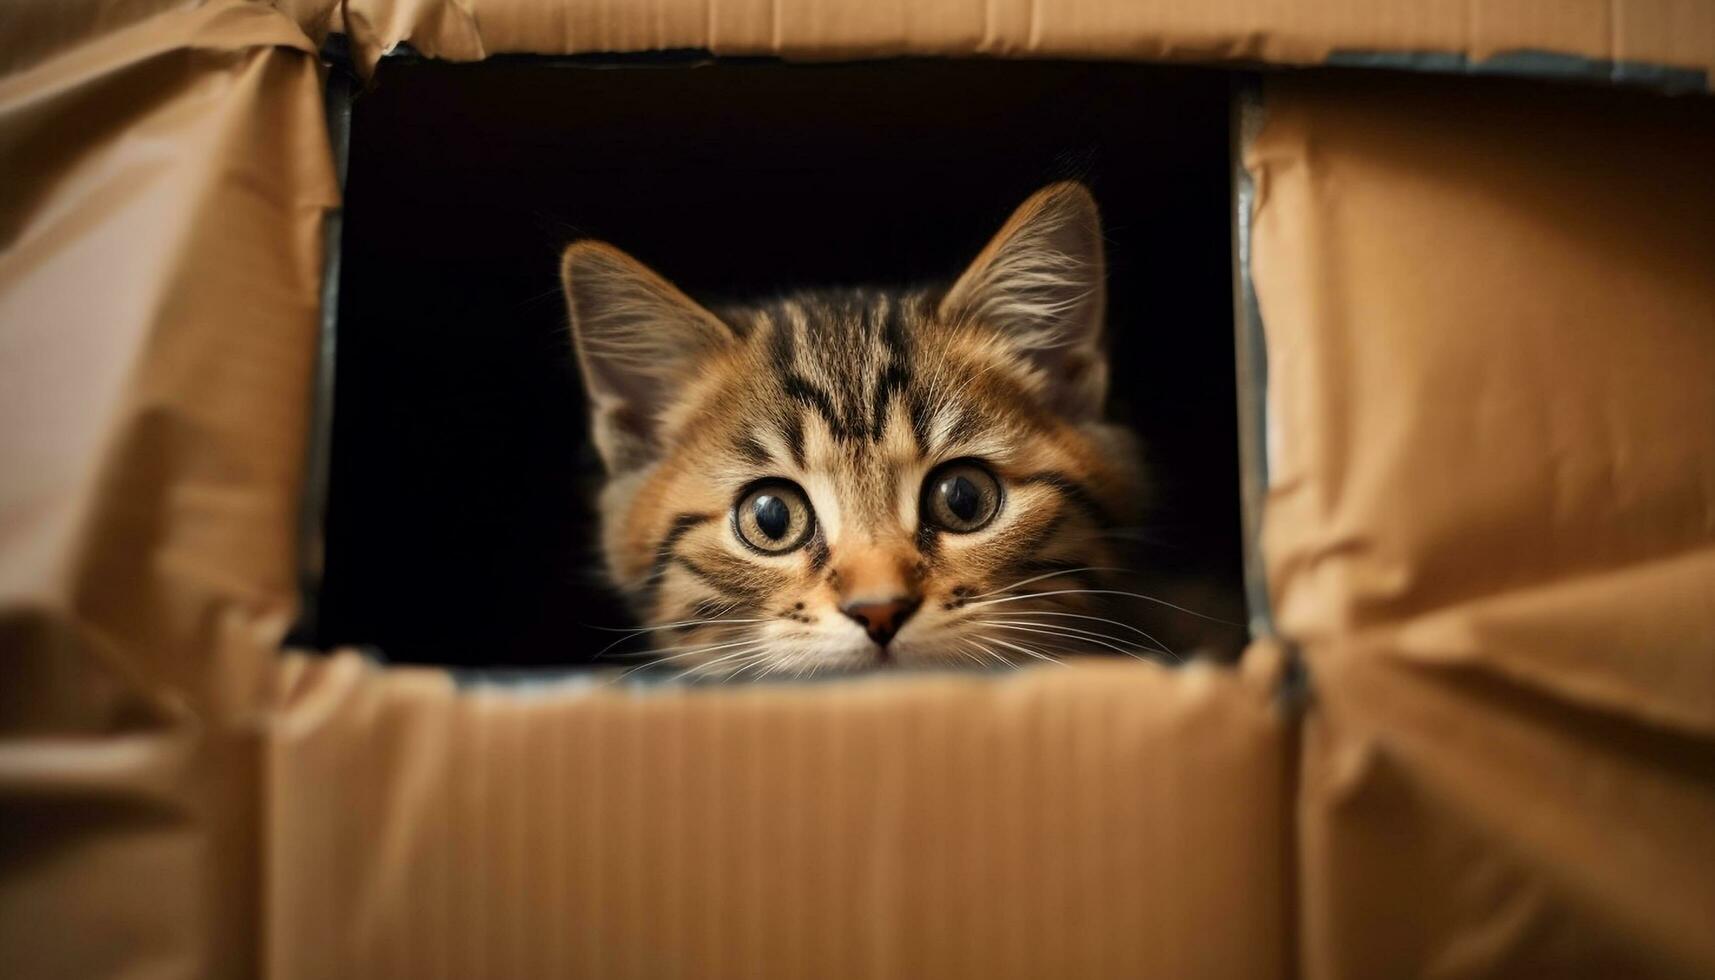 Cute kitten hiding in a box, peeking out, staring generated by AI photo